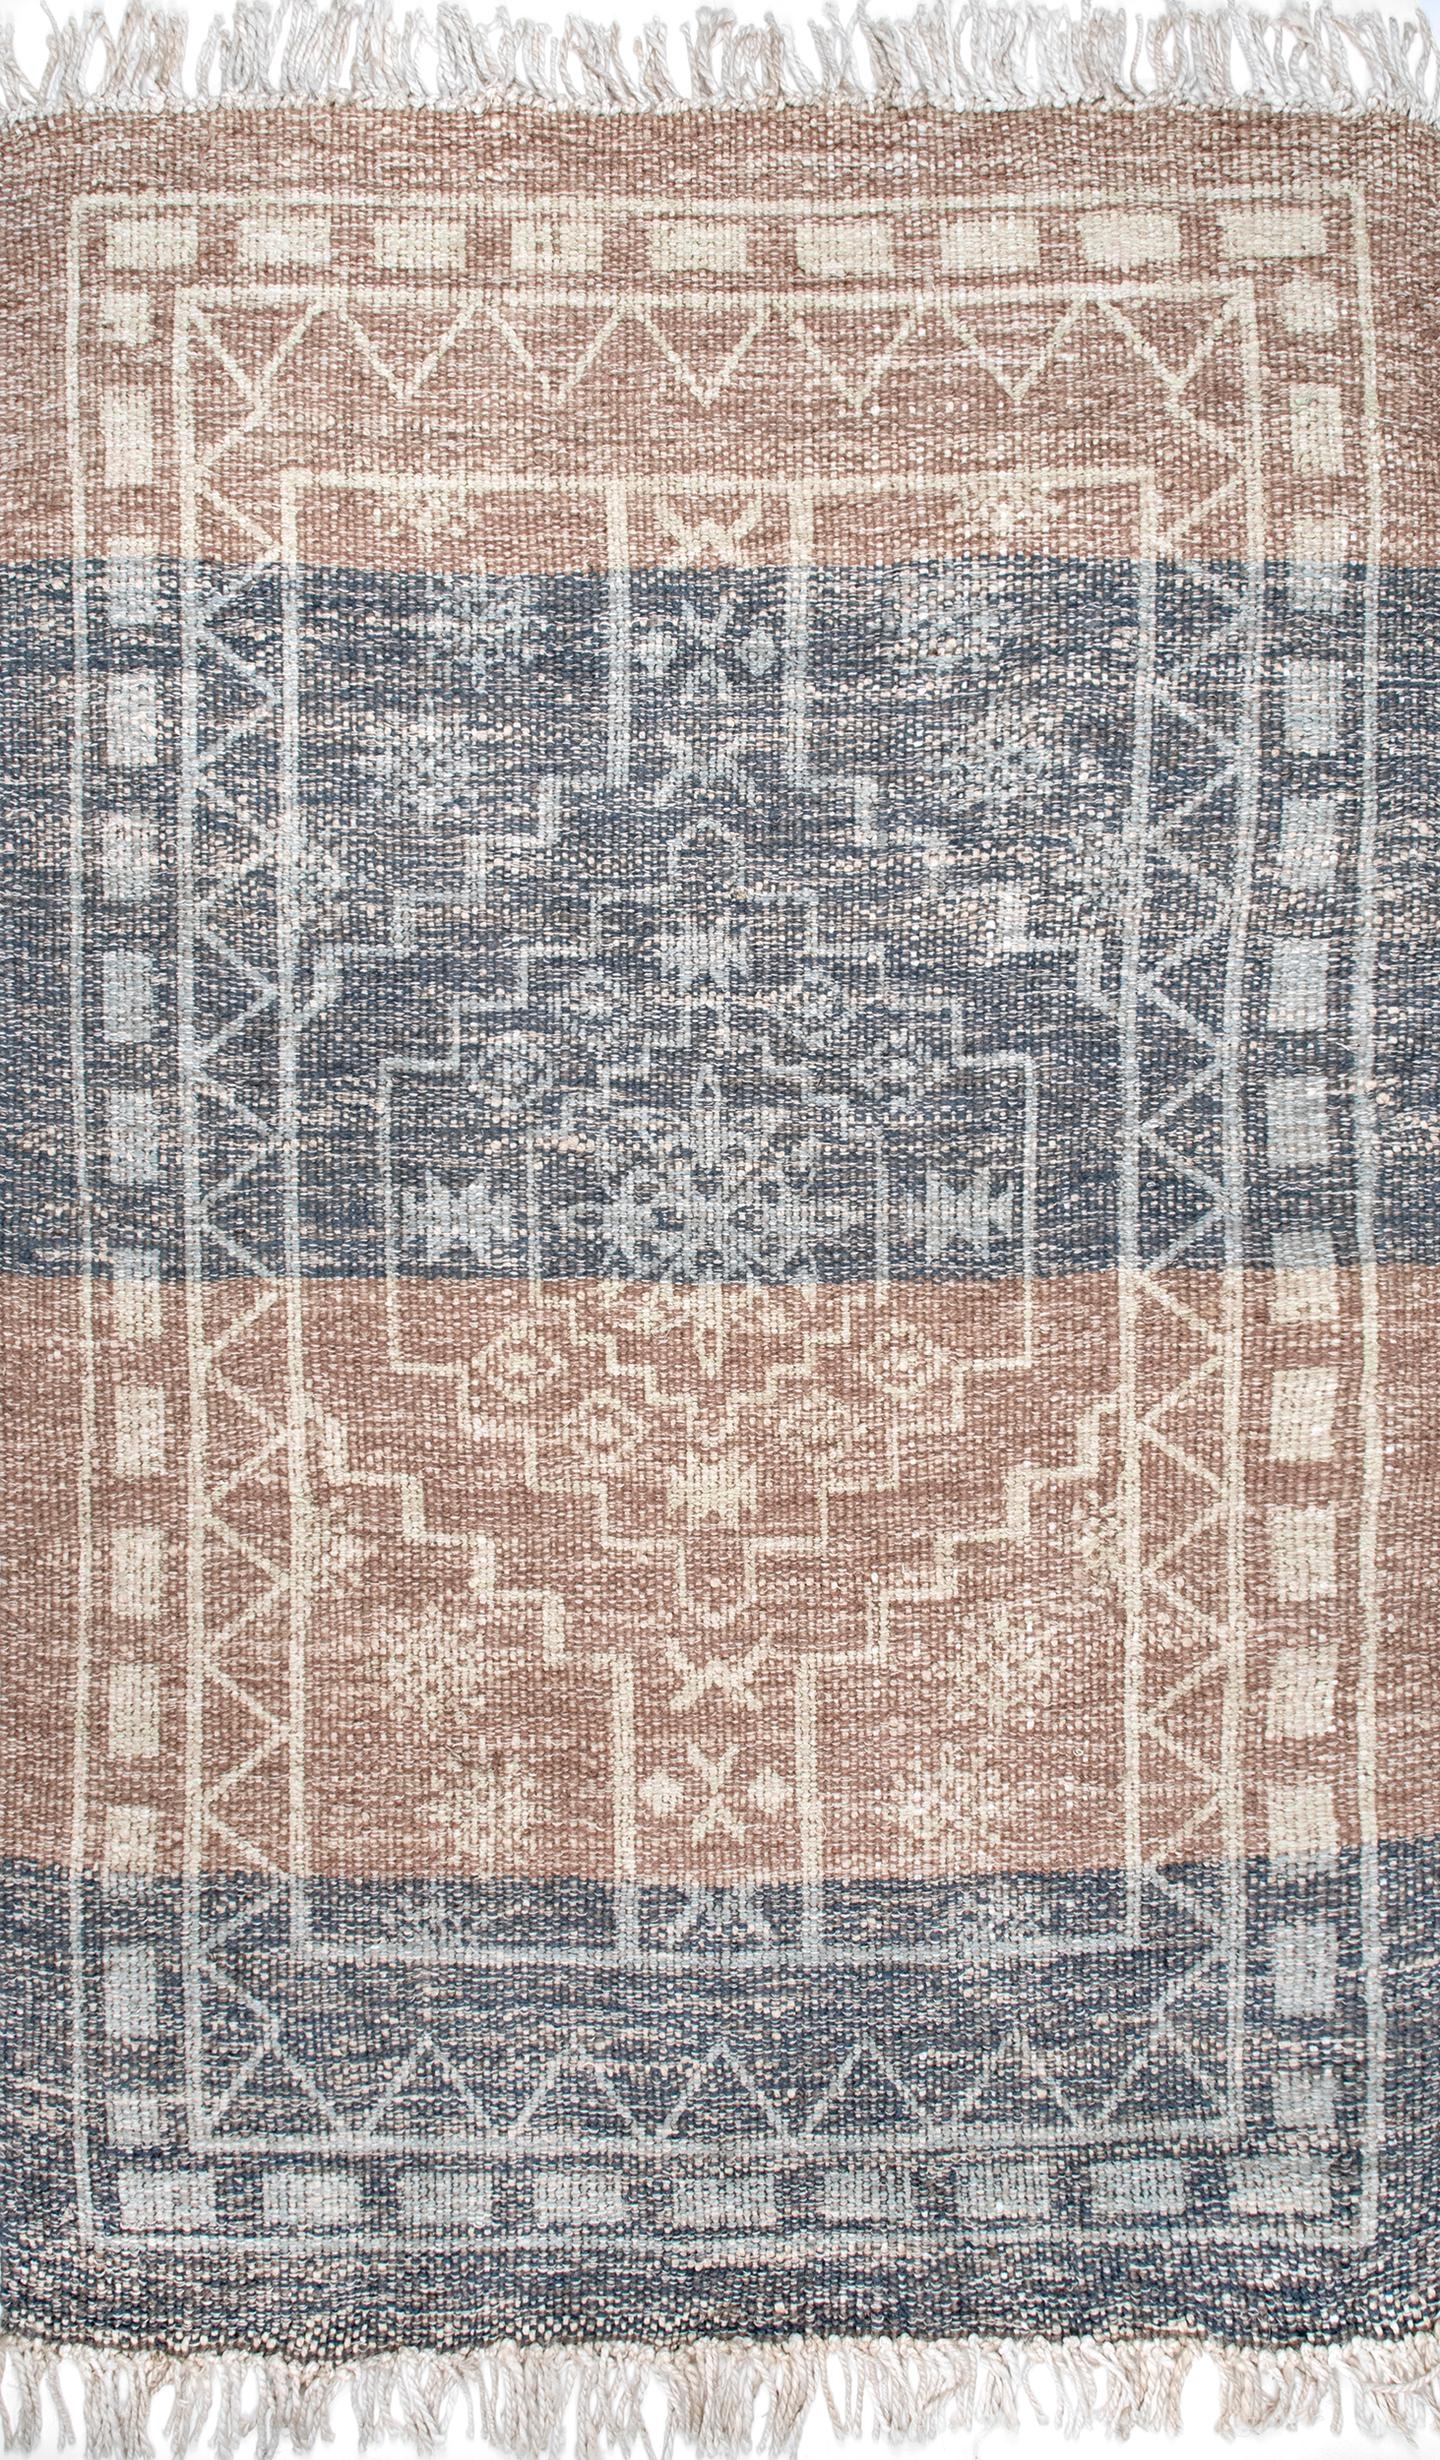 Beverly Shaded Tribal Area Rug - Image 1